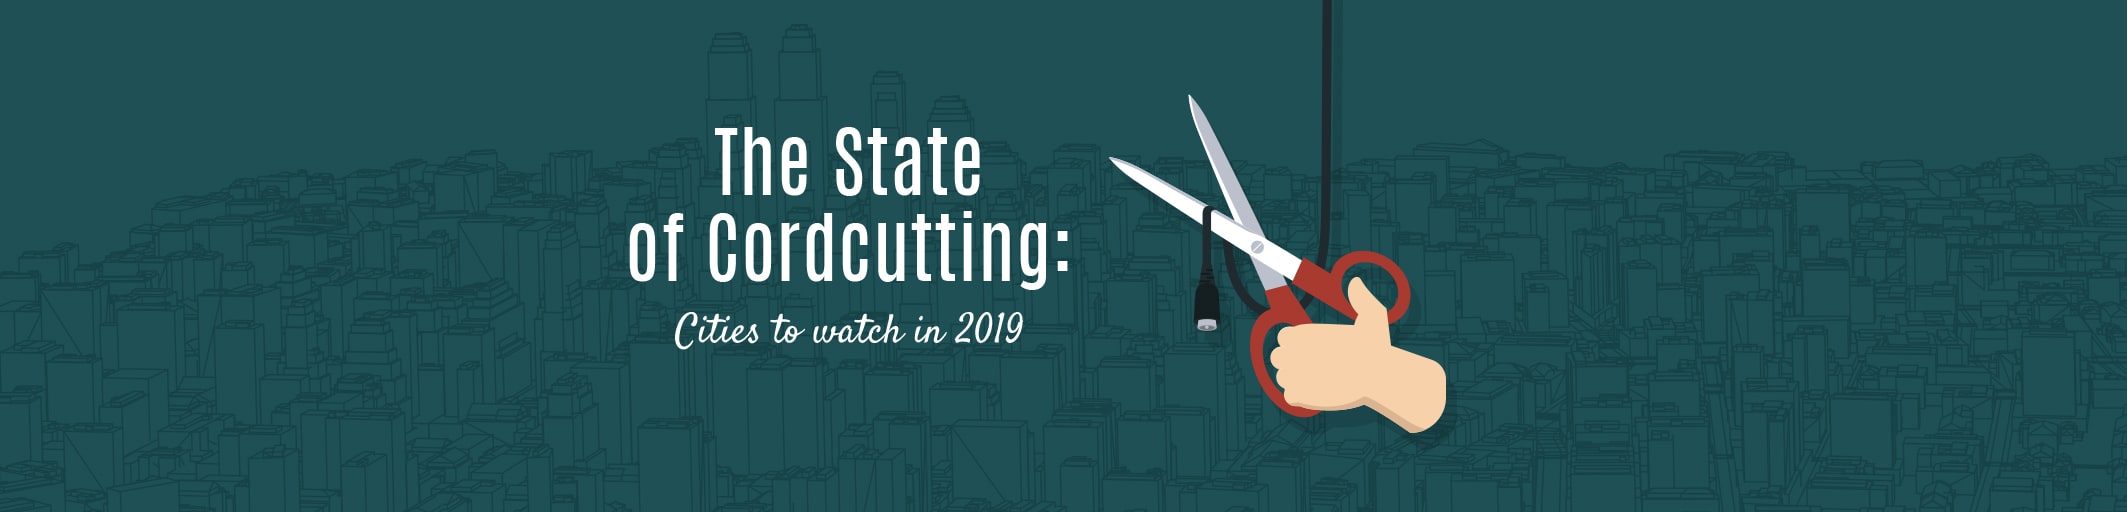 The State Of Cordcutting: Cities To Watch In 2019